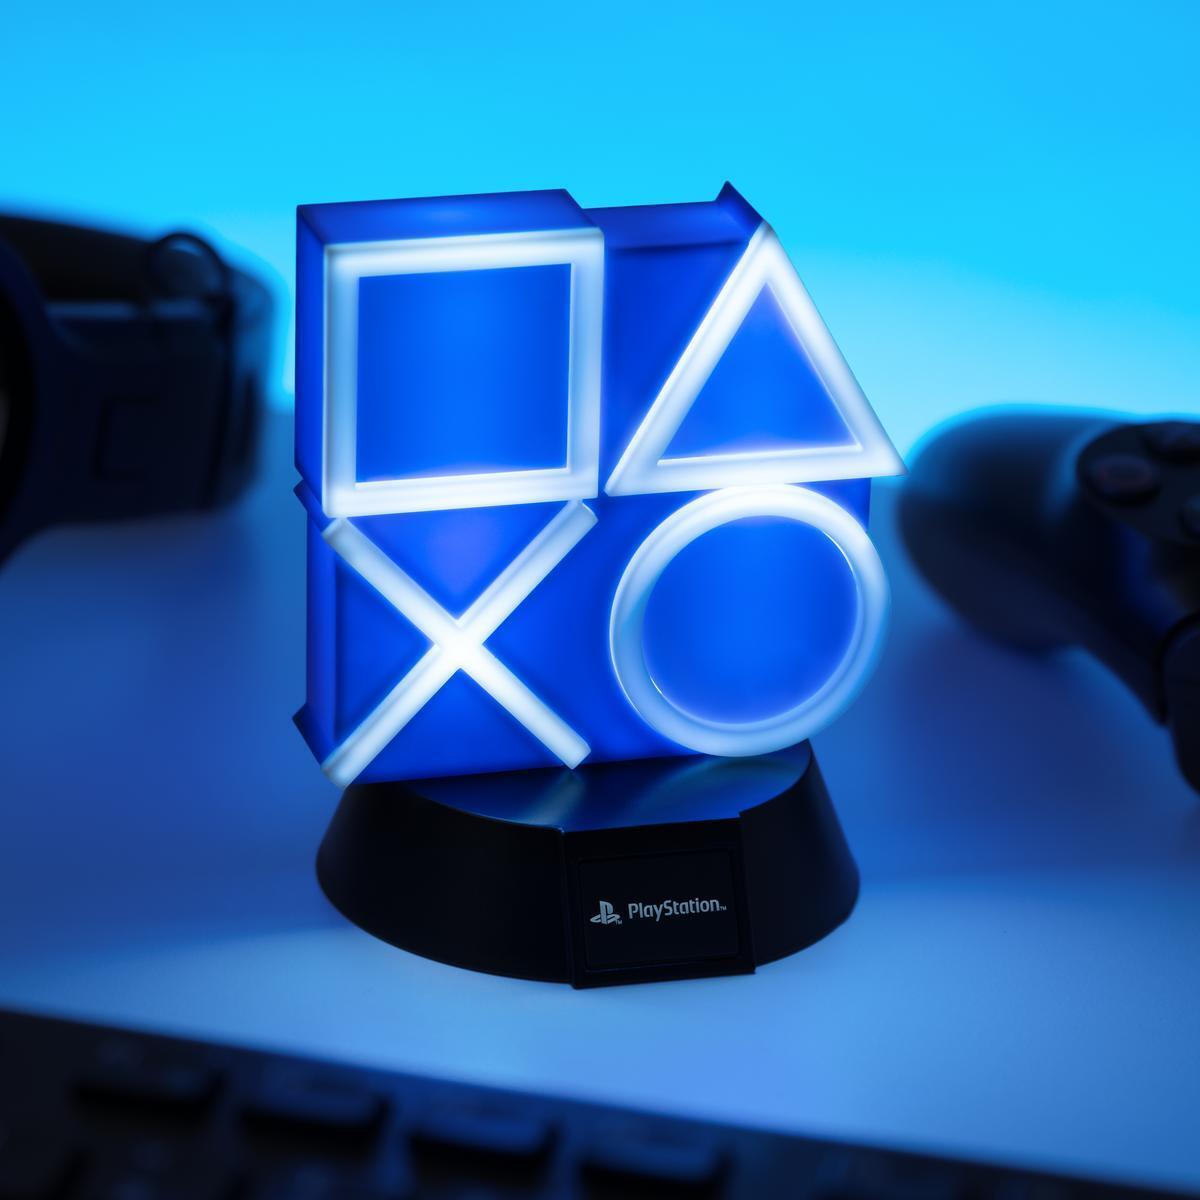 Playstation Icons Light Lampe Licht